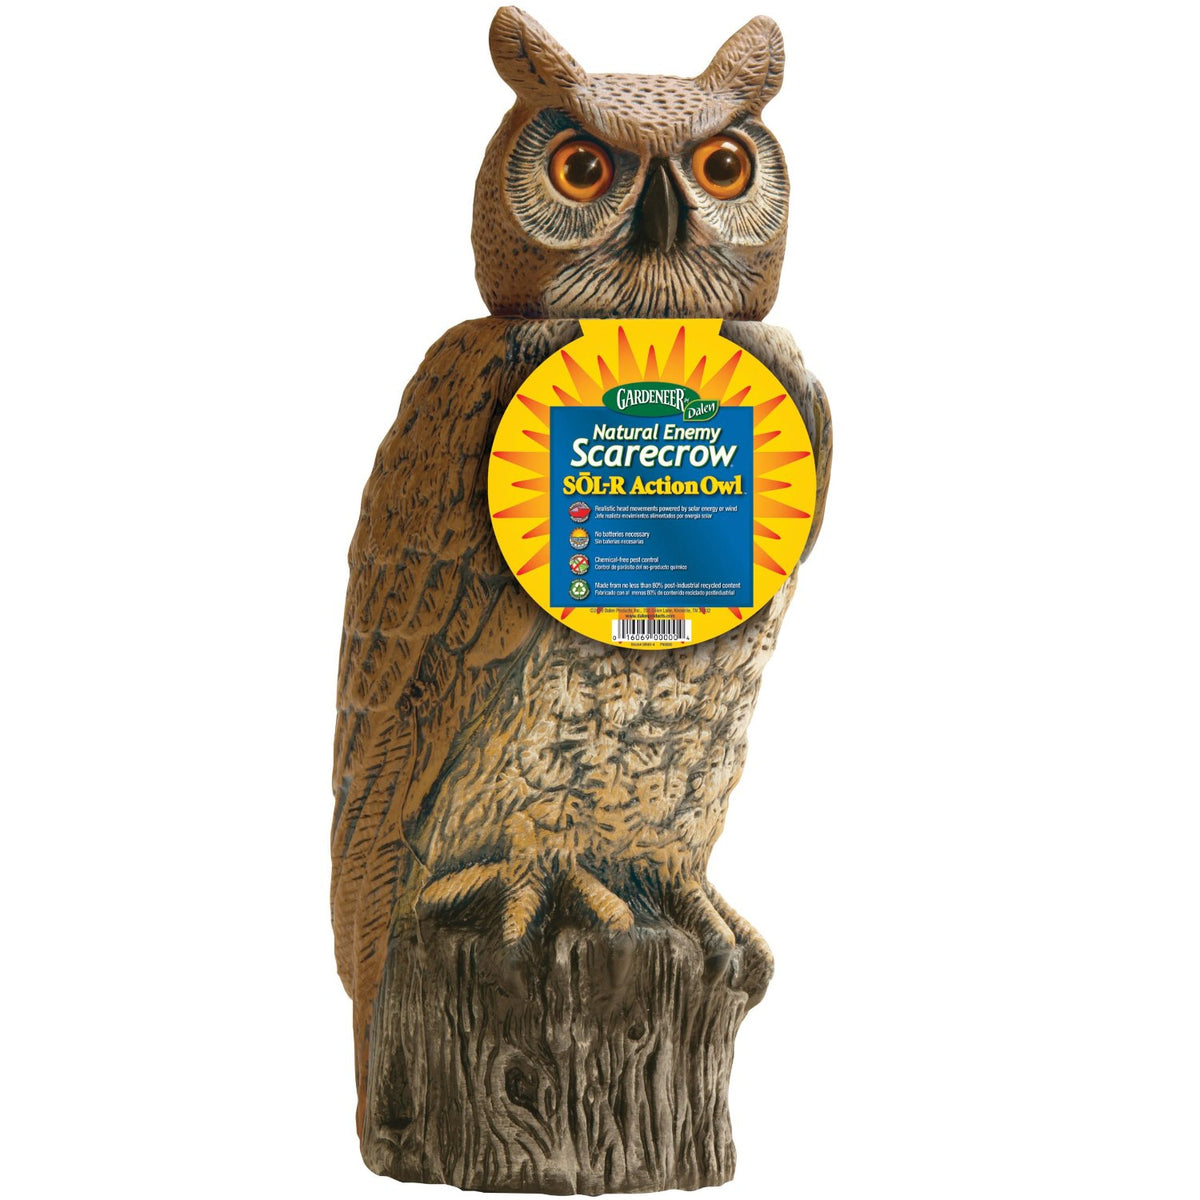 Buy solar action owl - Online store for outdoor & lawn decor, decorative stones & statues in USA, on sale, low price, discount deals, coupon code